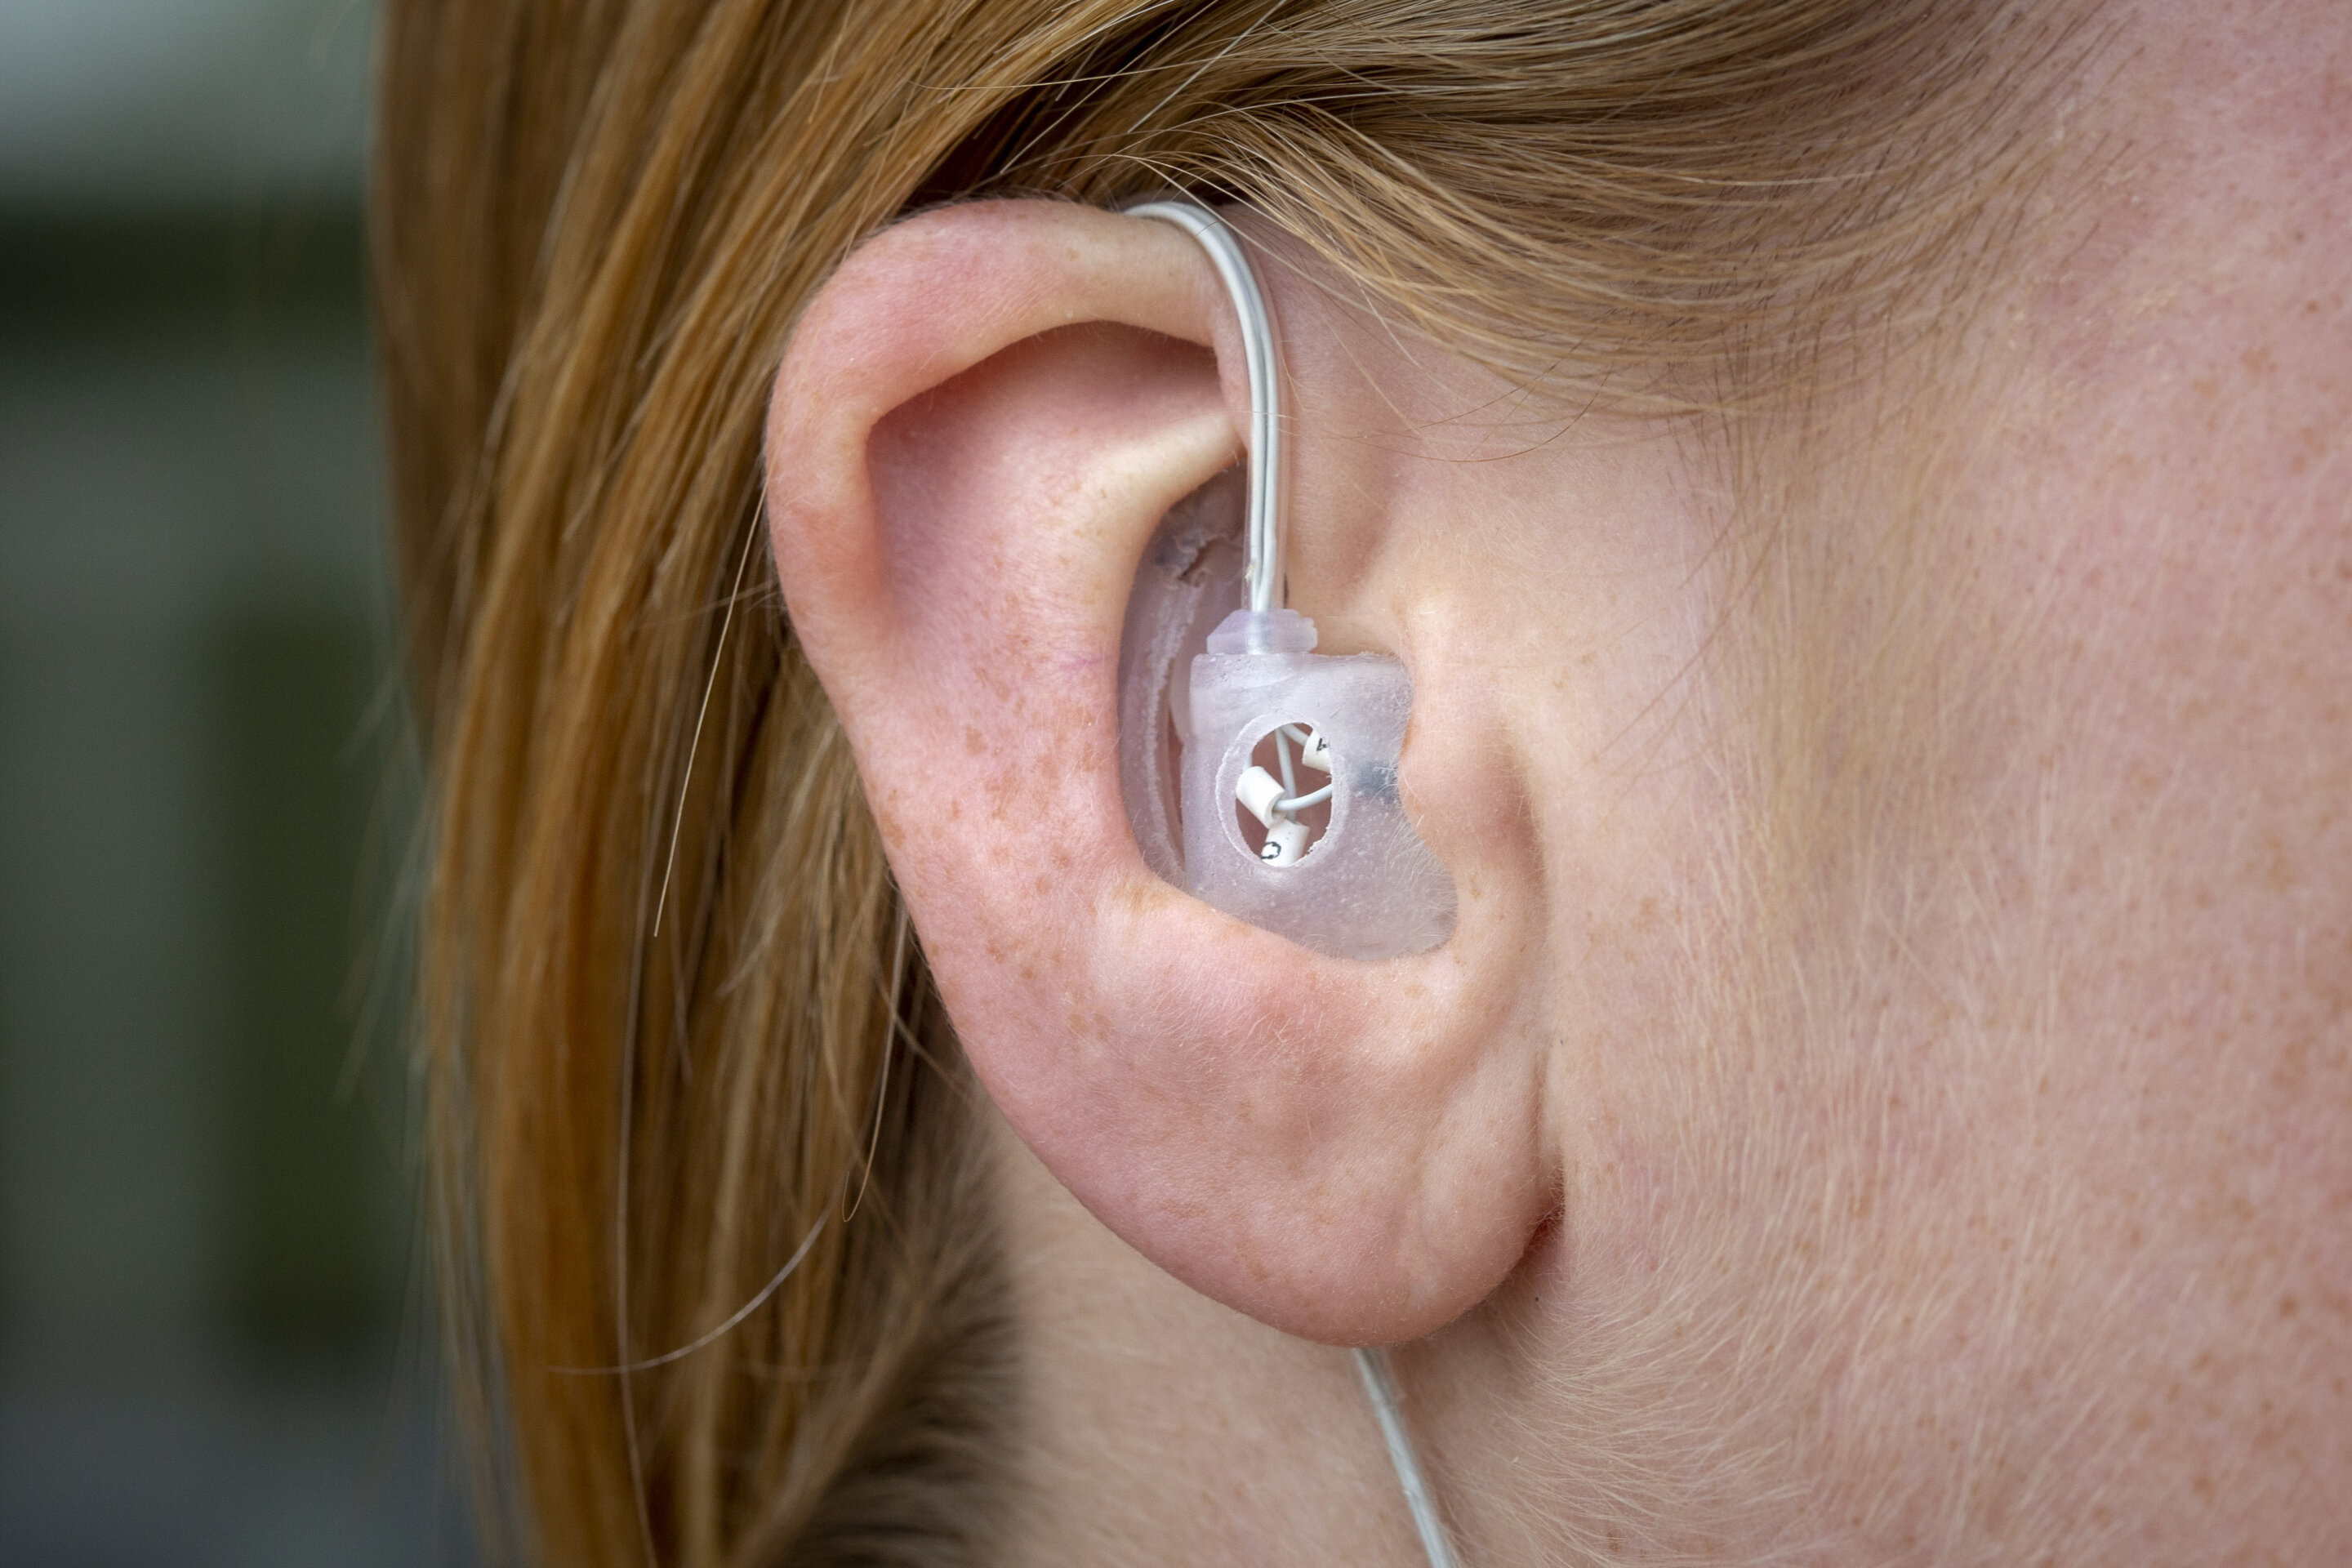 Clever earbud will evaluate how astronauts sleep